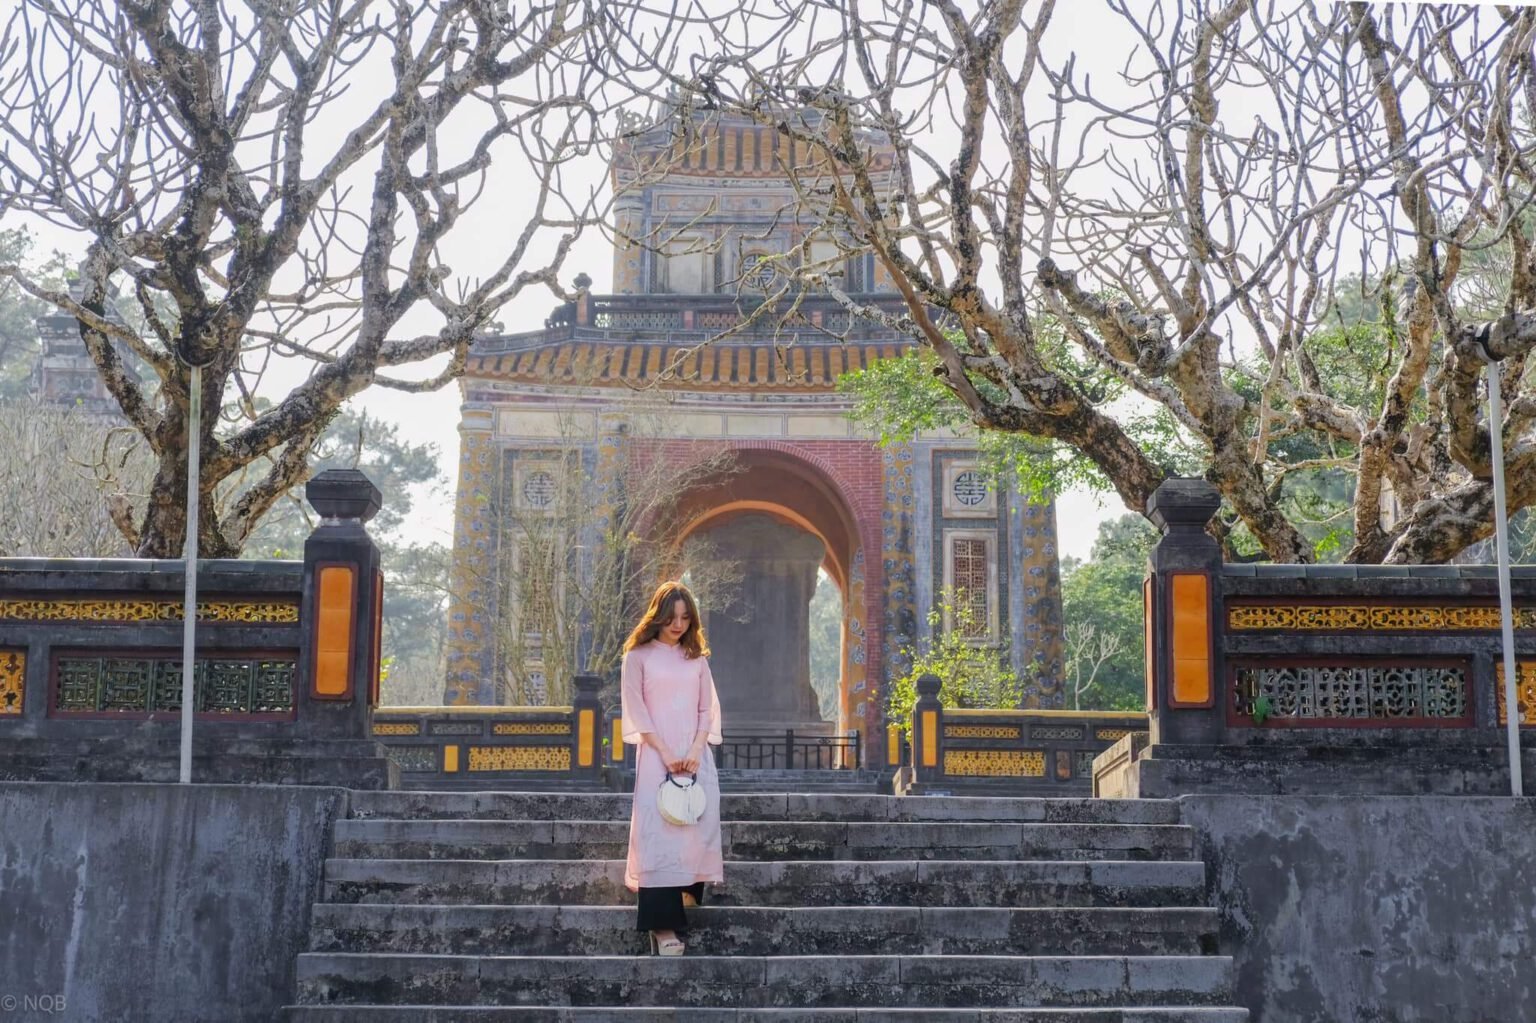 Visit the most famous royal tombs in Hue